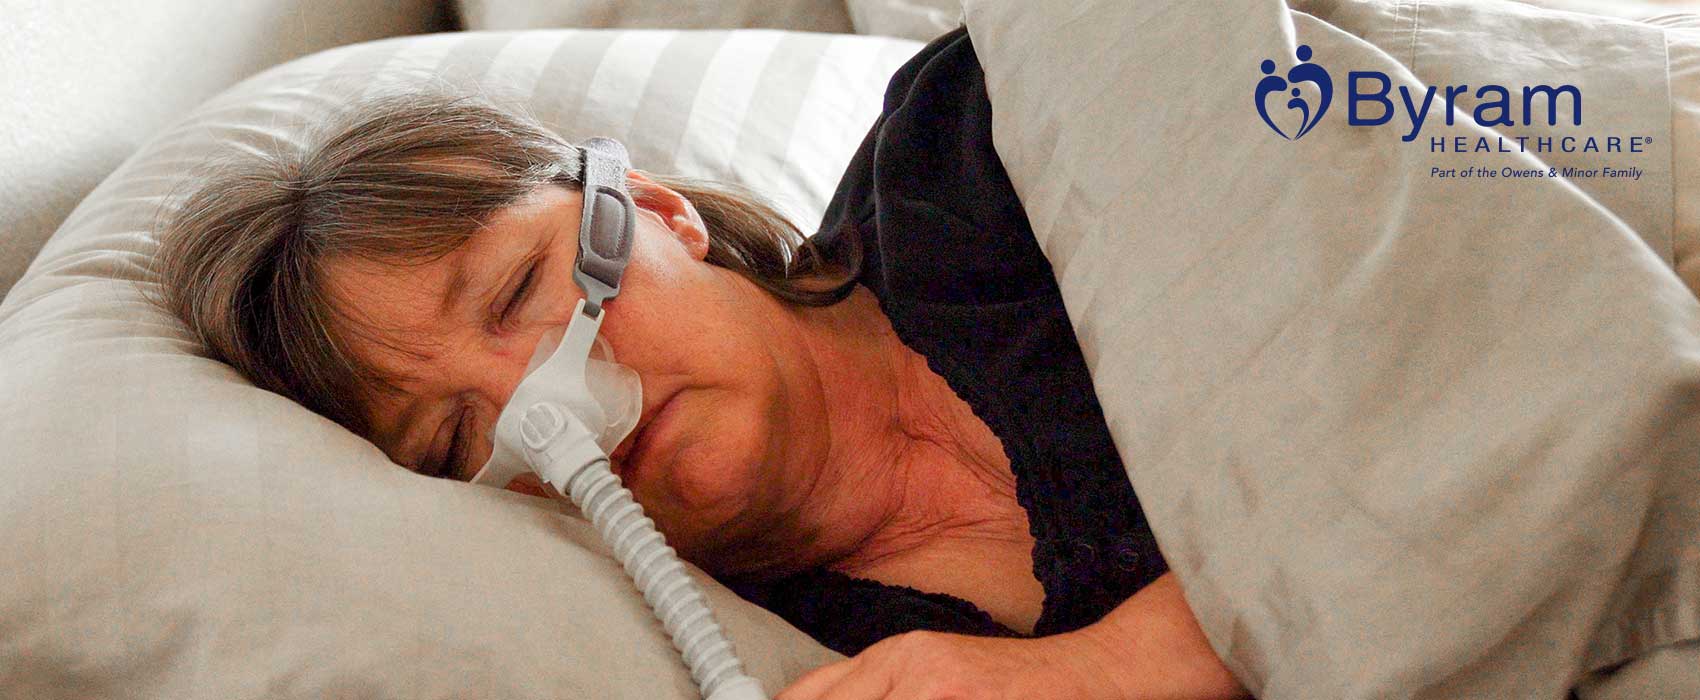 woman in bed with c-pap mask